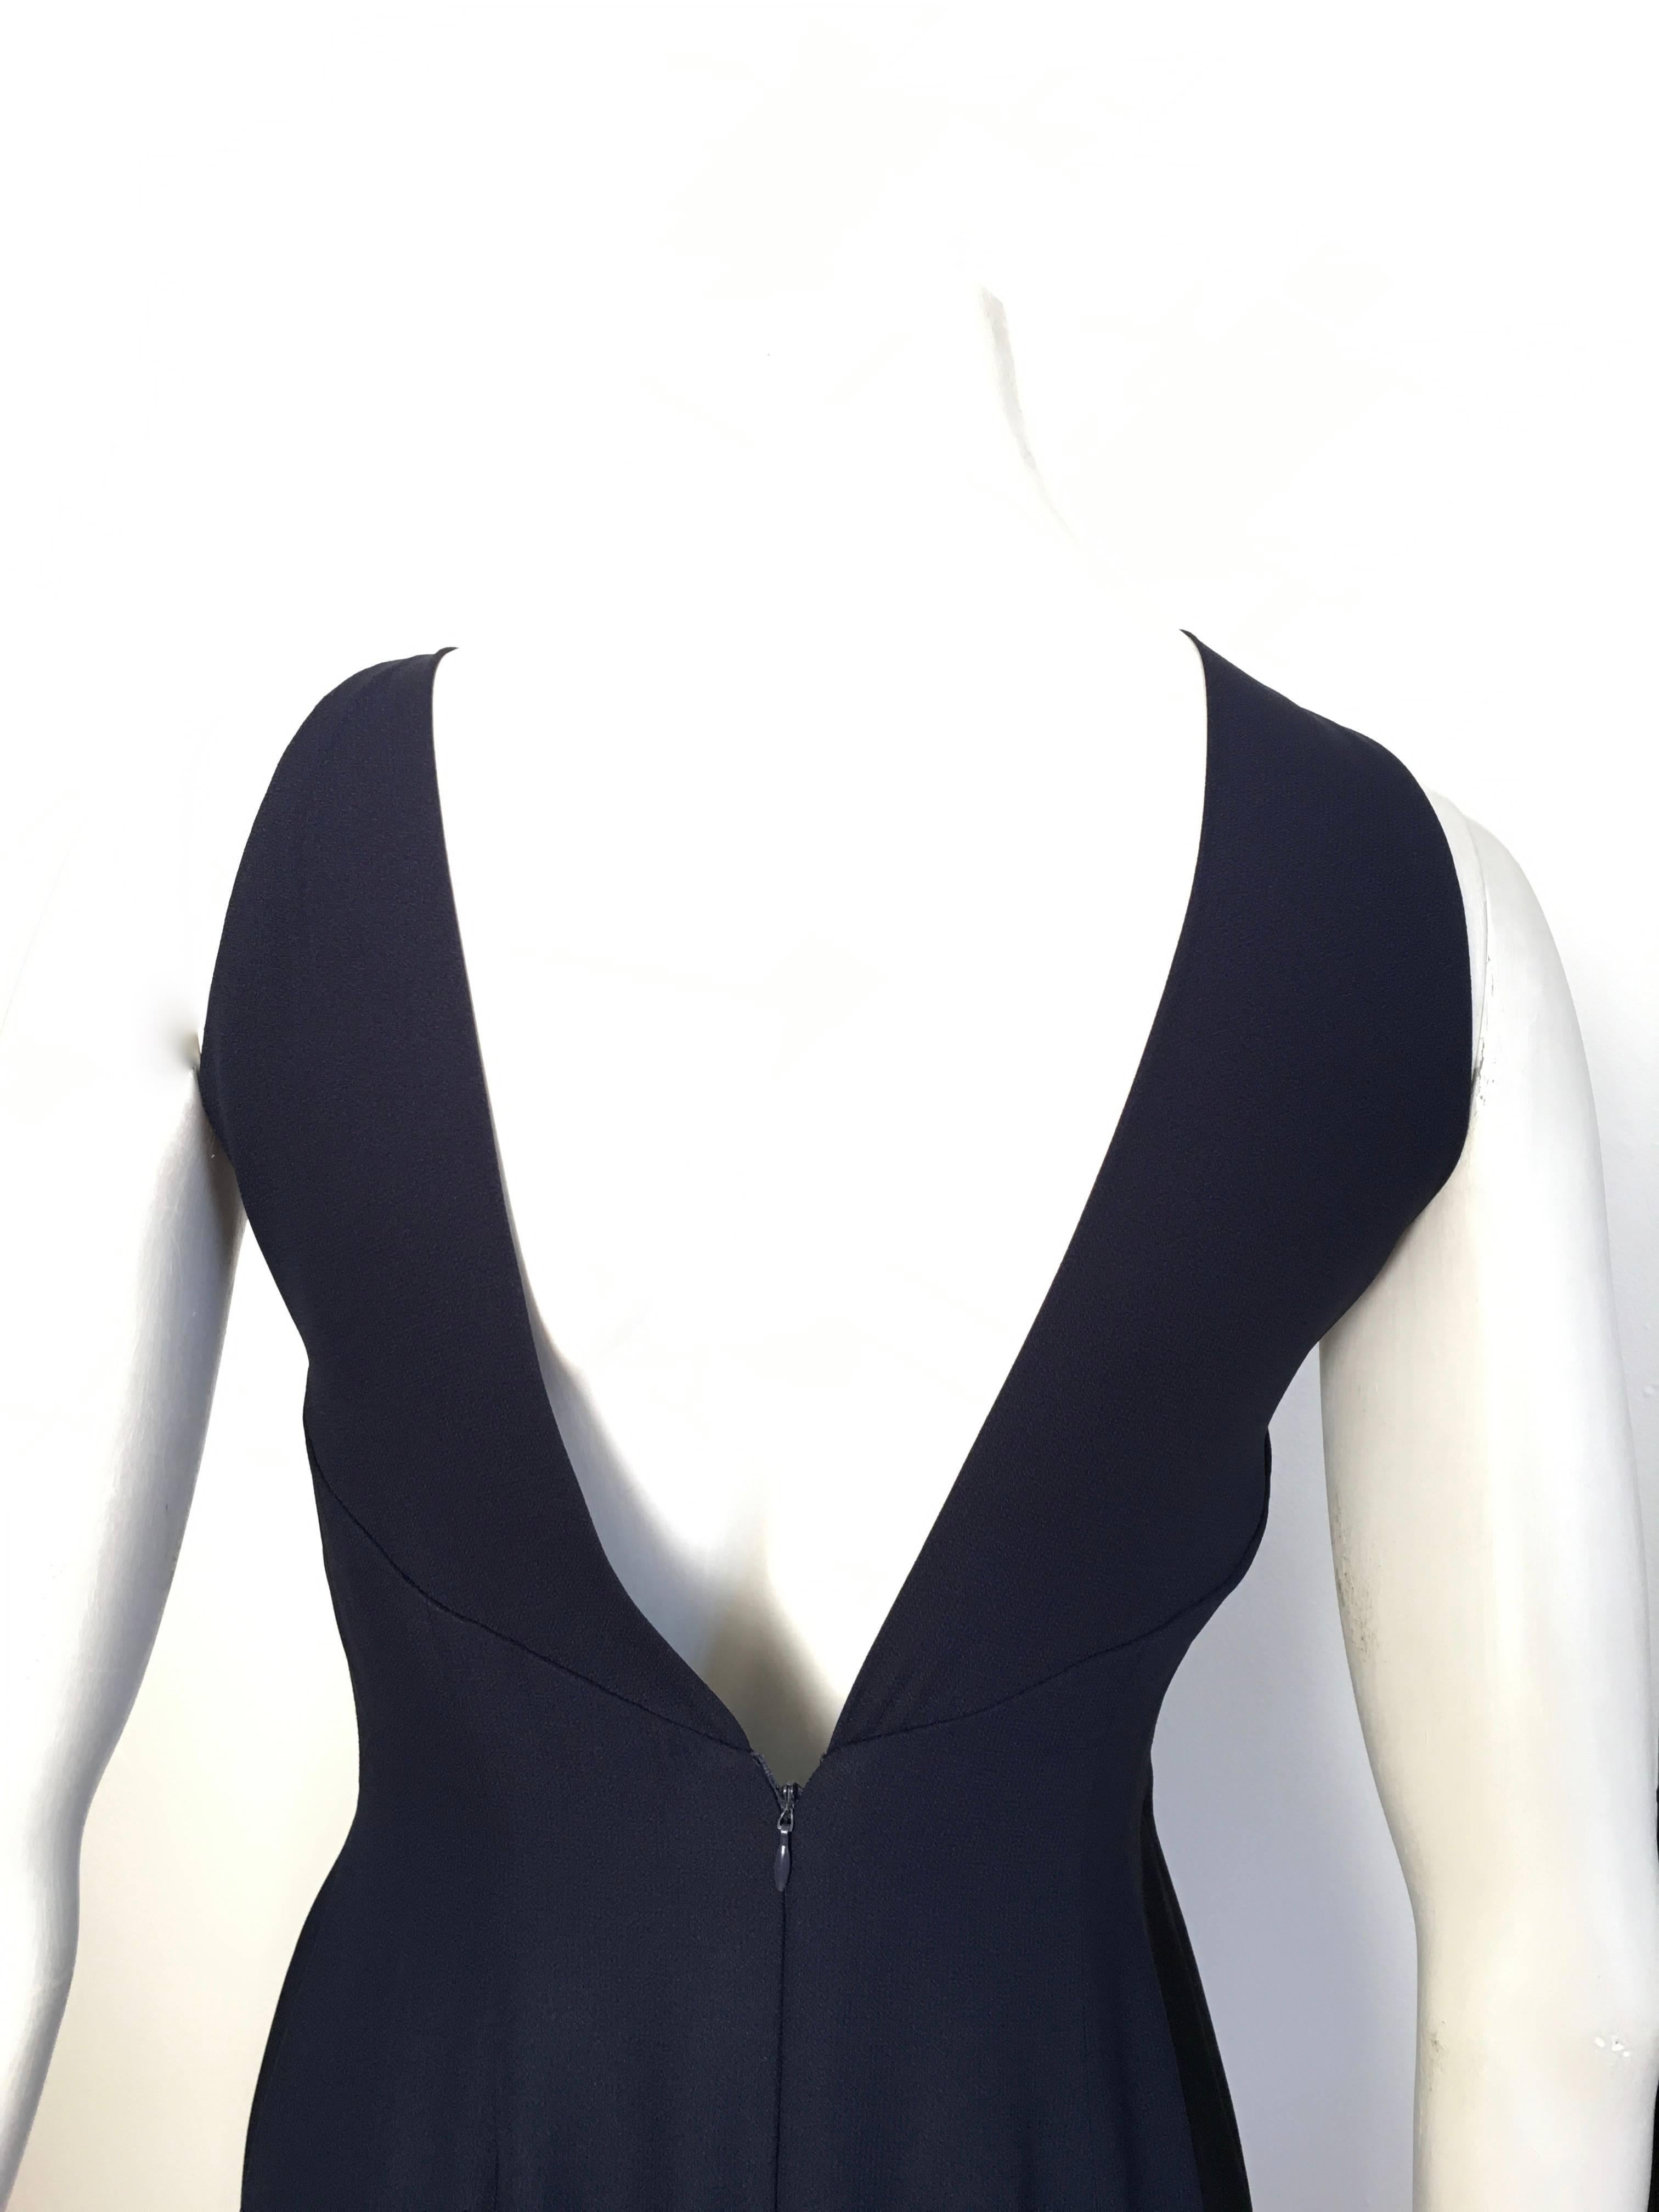 Bill Blass for Neiman Marcus 1980s Navy Silk Crepe Gown with Train Size 6. For Sale 2